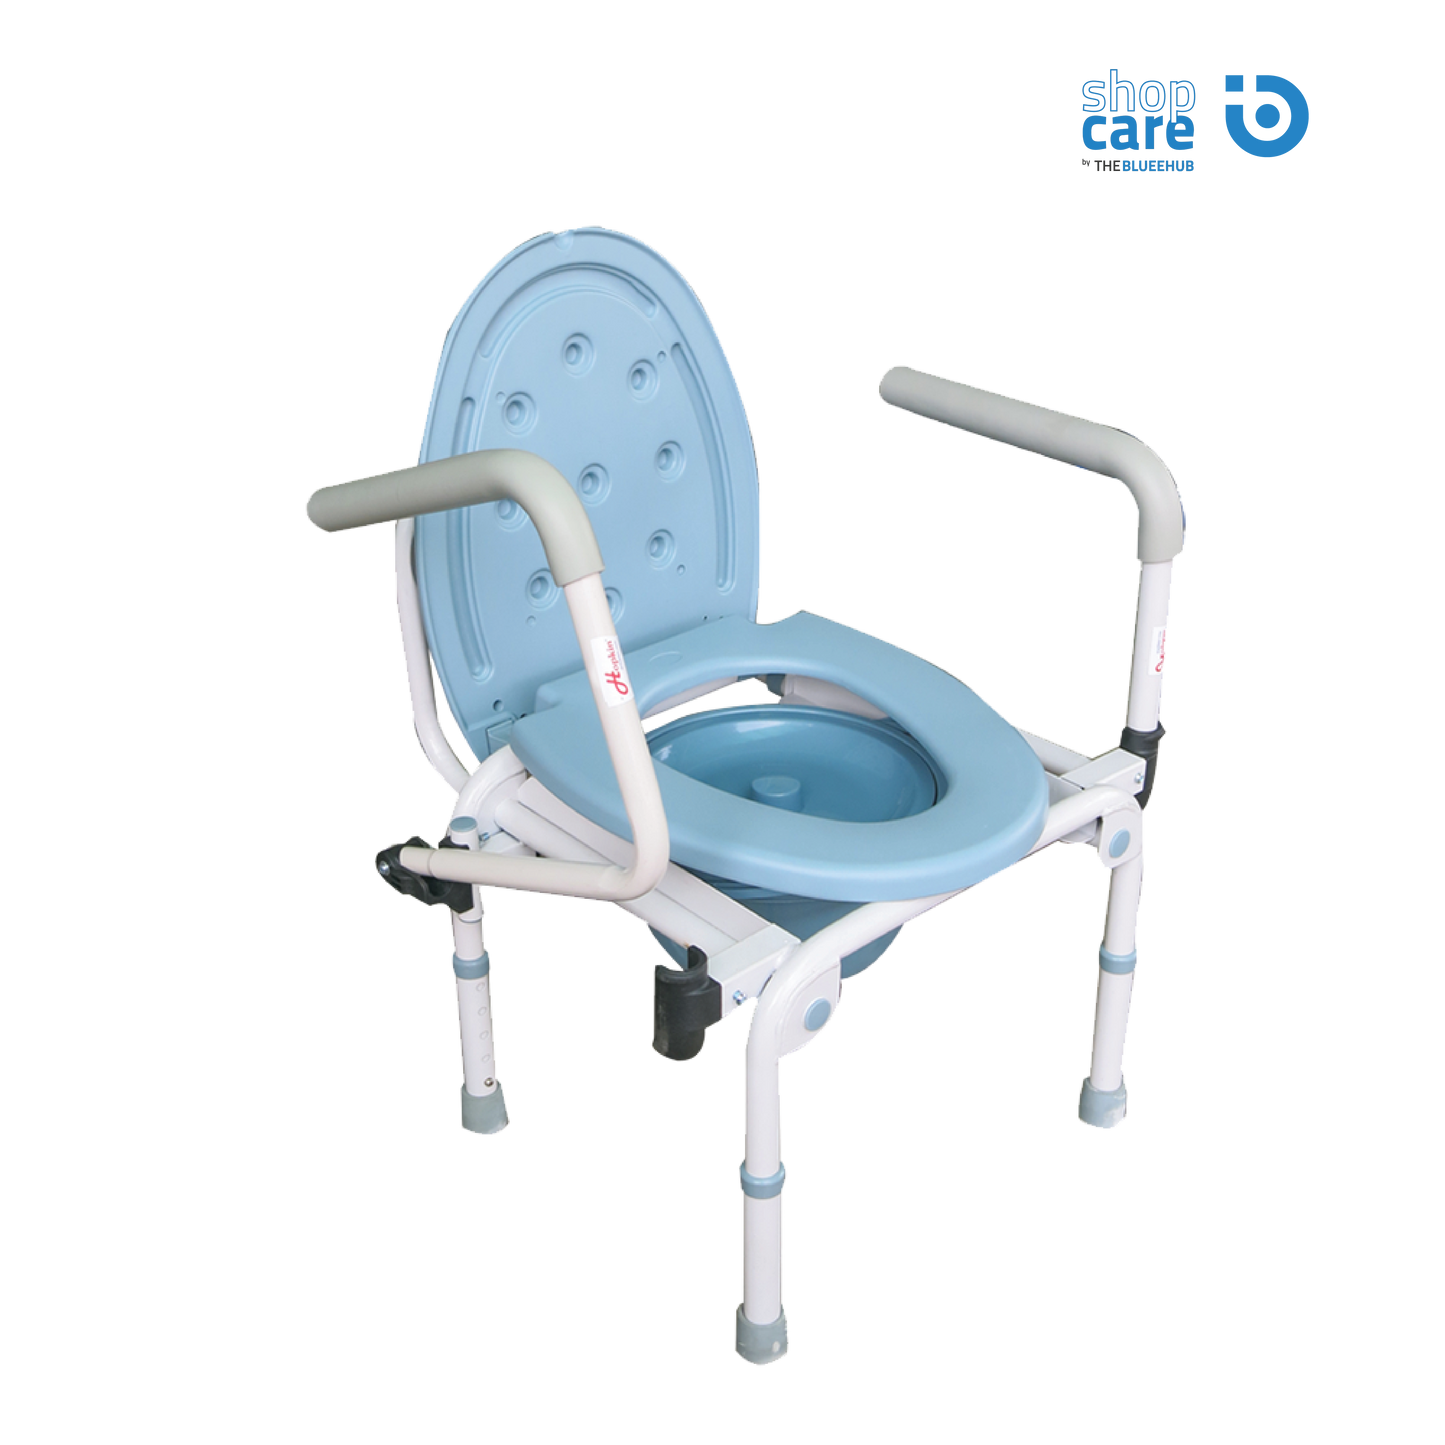 [BUNDLE DEALS] 3-IN-1 COMMODE SHOWER WHEELCHAIR WITH SEAT CUSHION